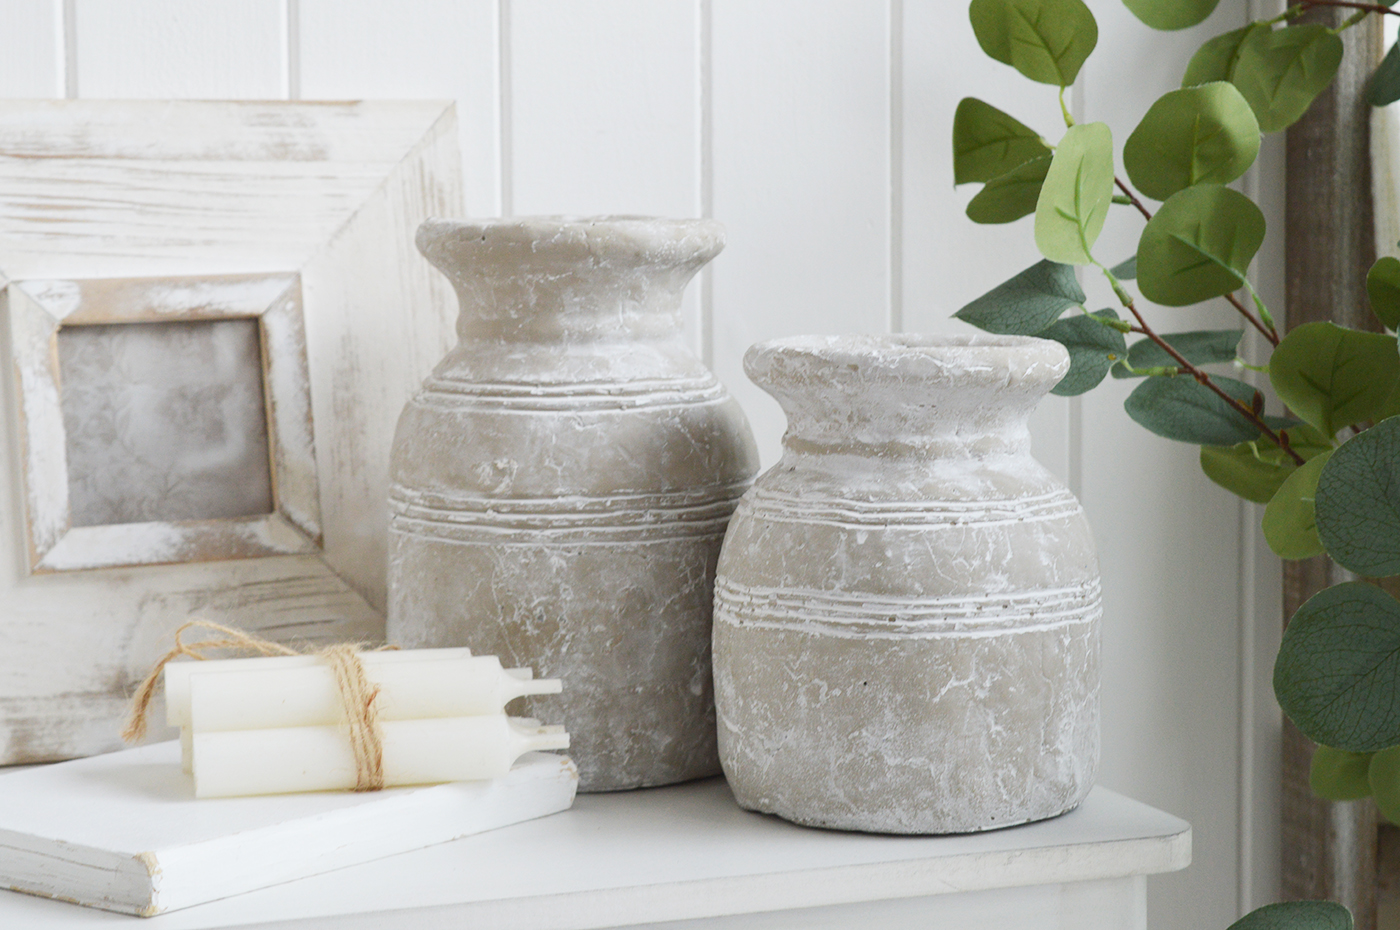 Newfane White Rustic Grey Jars - Console table and shelf styling and decor for New England and Hamptons Interiors, New England style furniture and accessories for country, coastal, city and modern farmhouse homes.